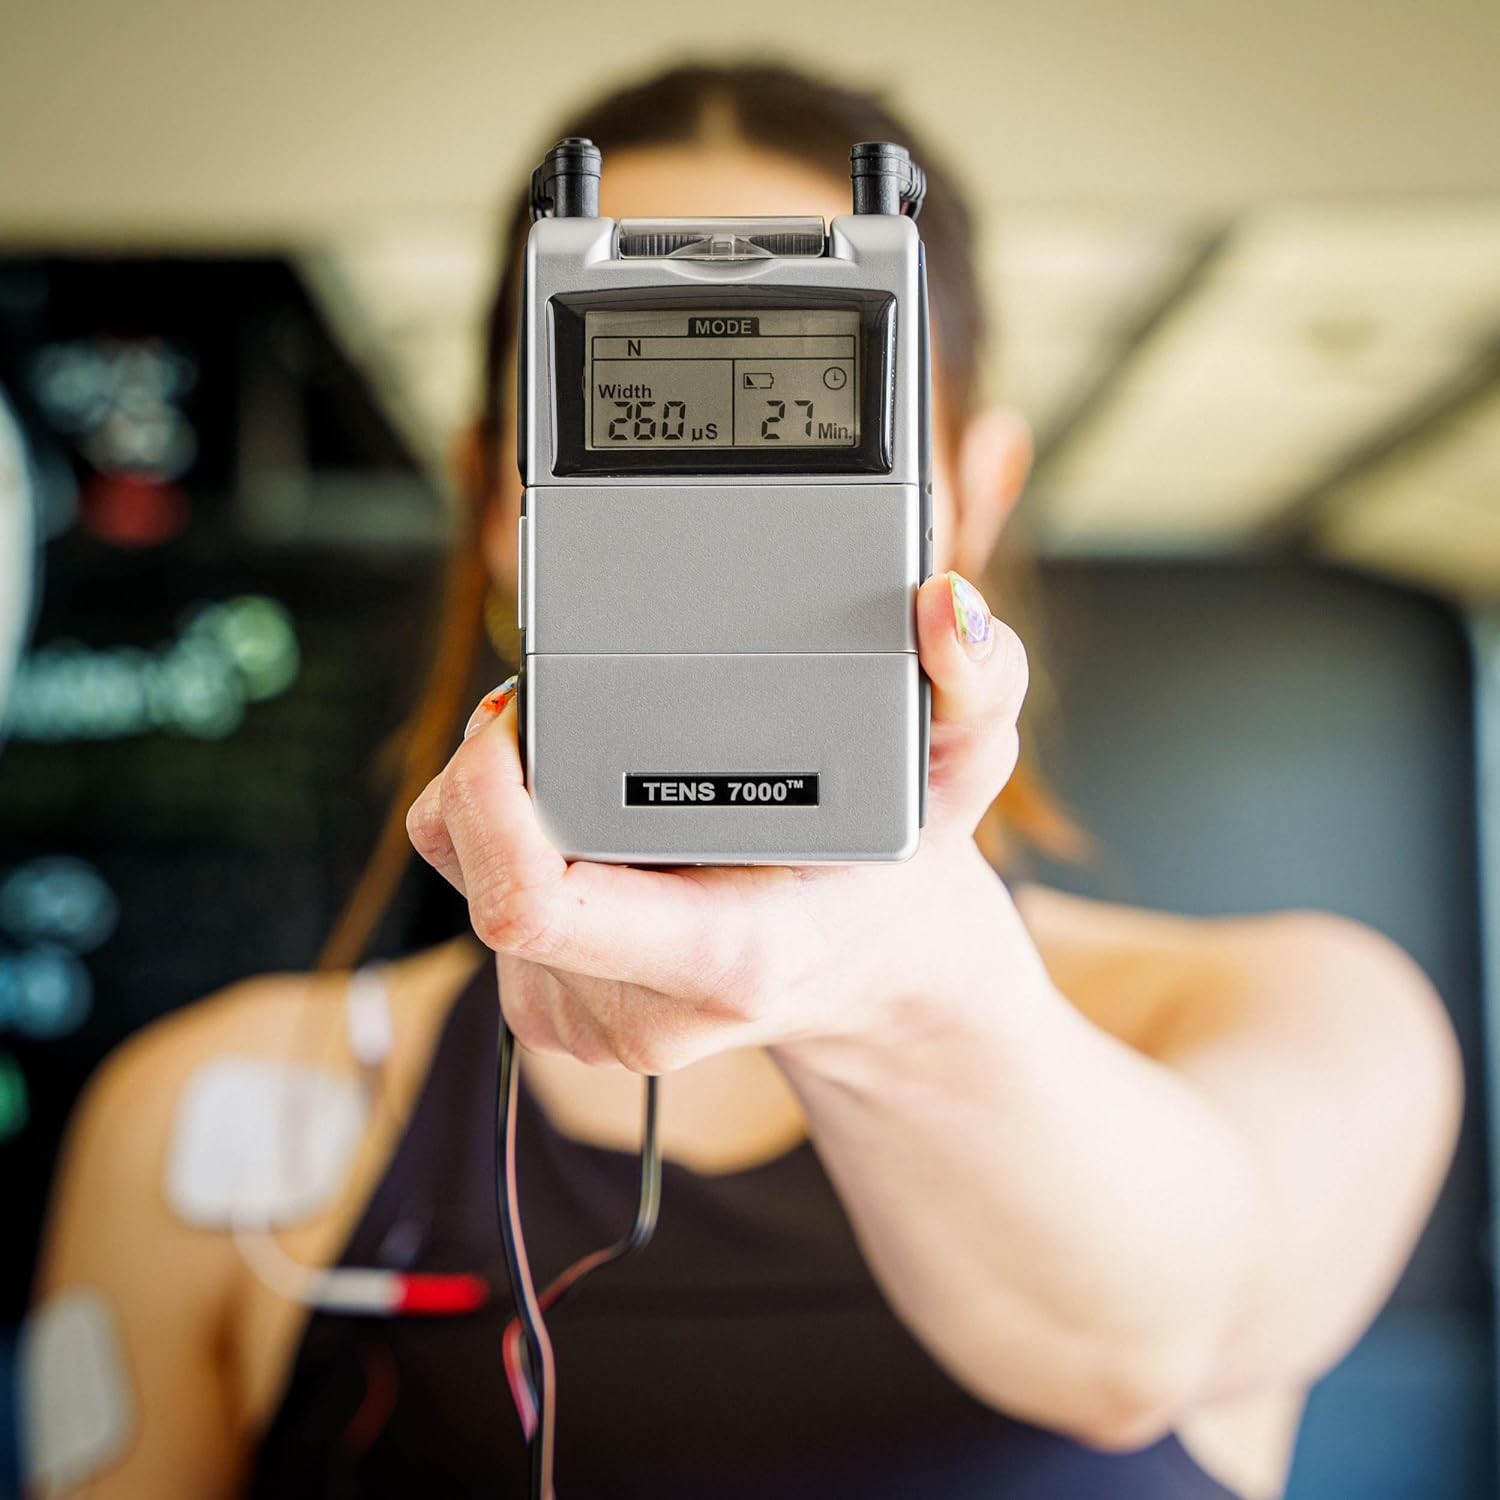 A TENS unit being held up to the camera